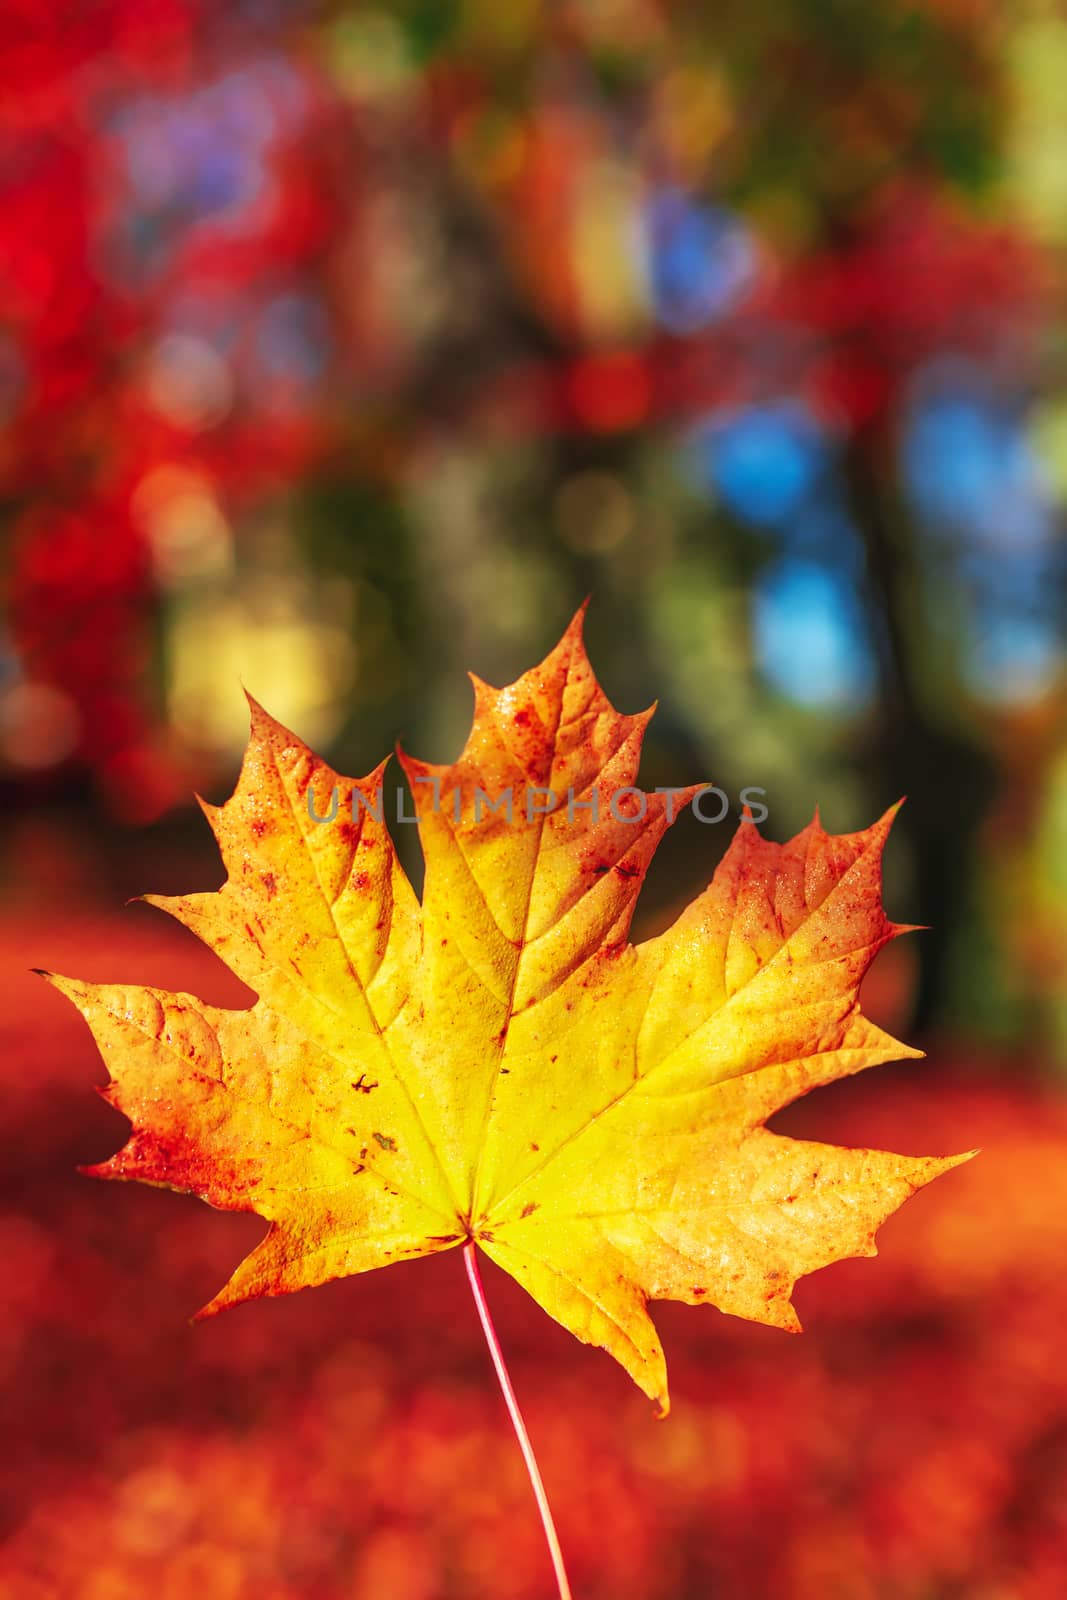 autumn fall maple leaf with shallow focus and blurry background. Fall in the park.